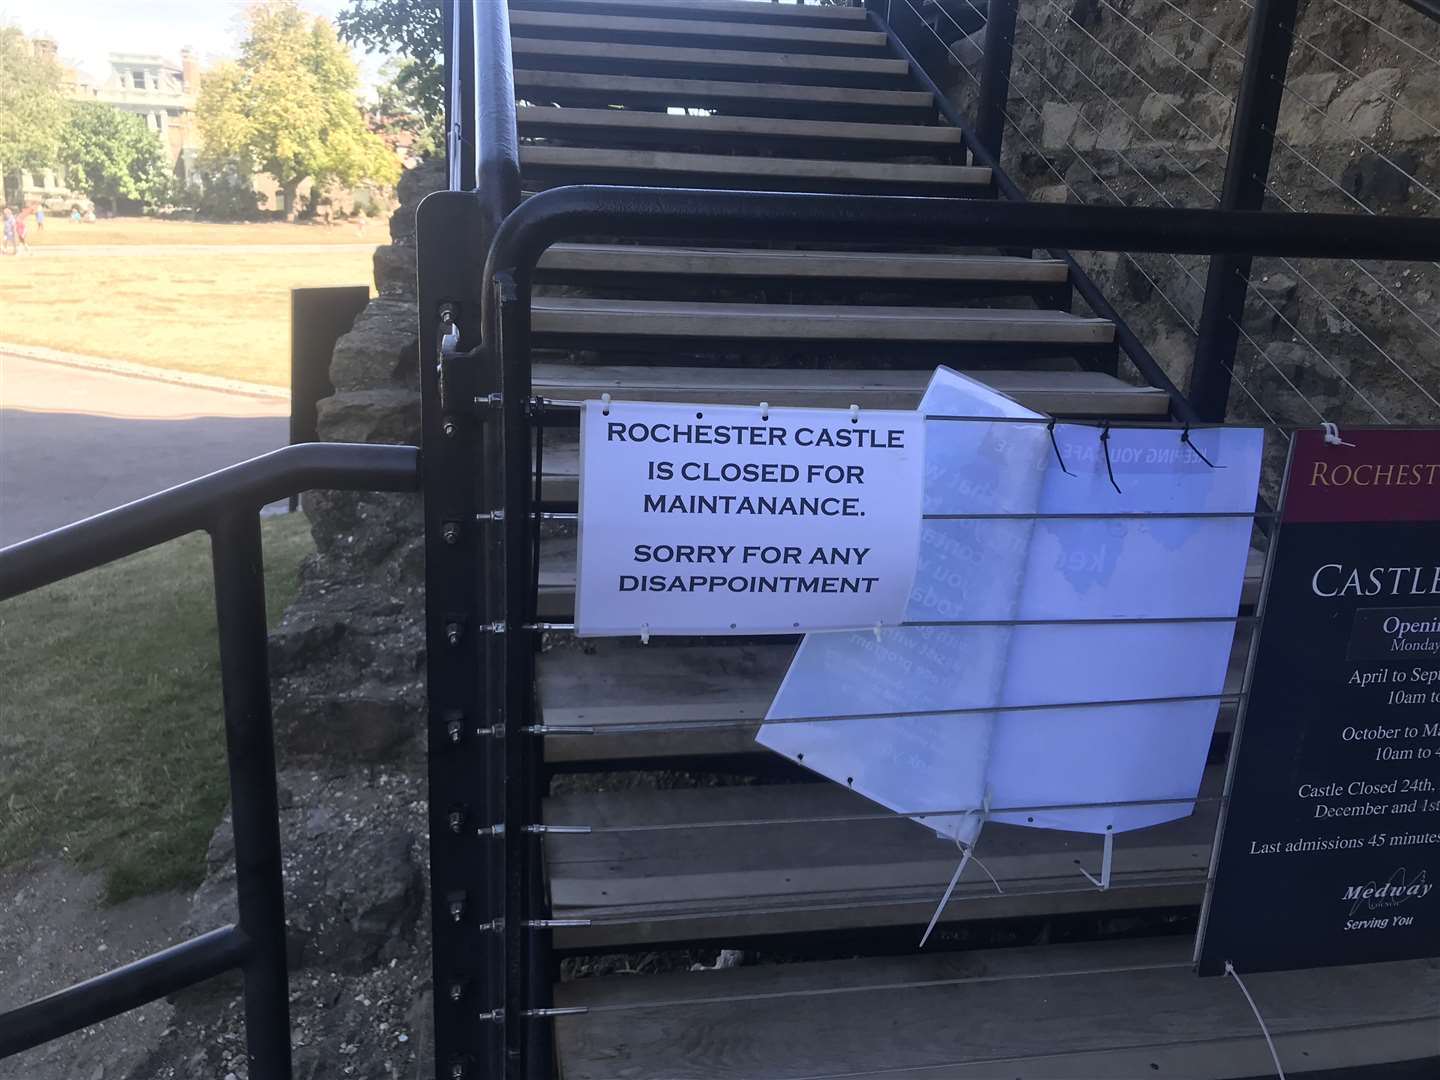 A sign posted at the castle today says it is closed for maintenance